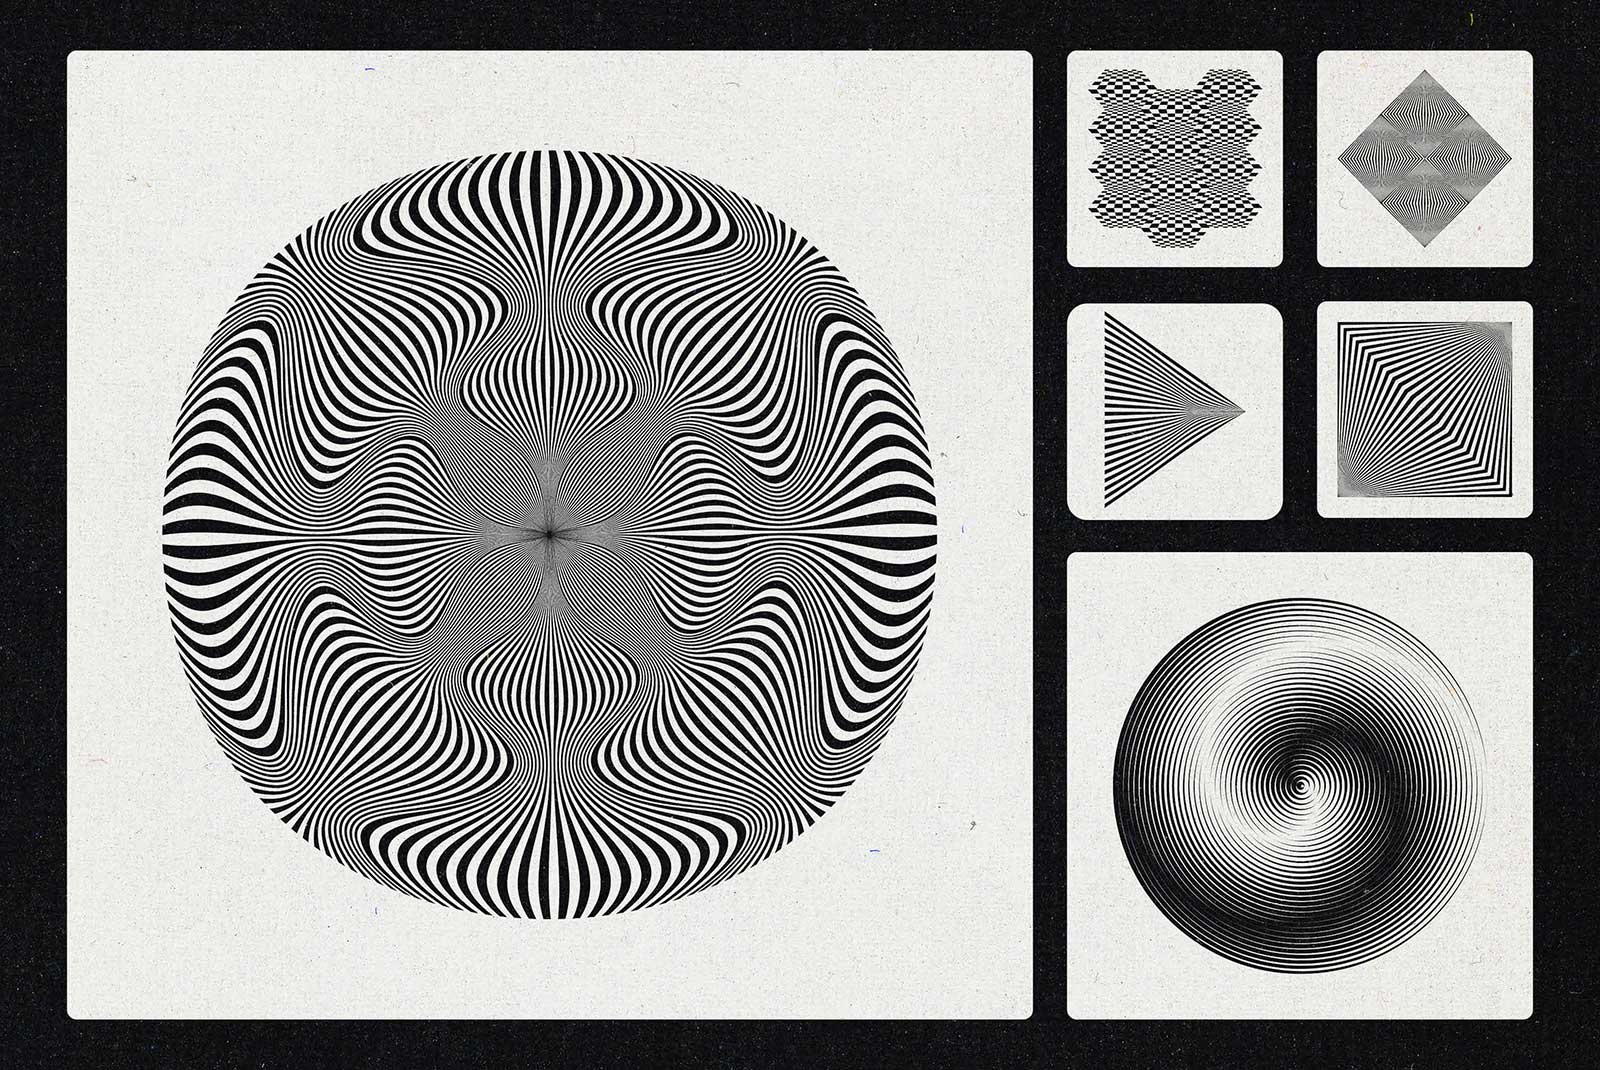 3 types of optical illusions are a union of science and art - Big Think